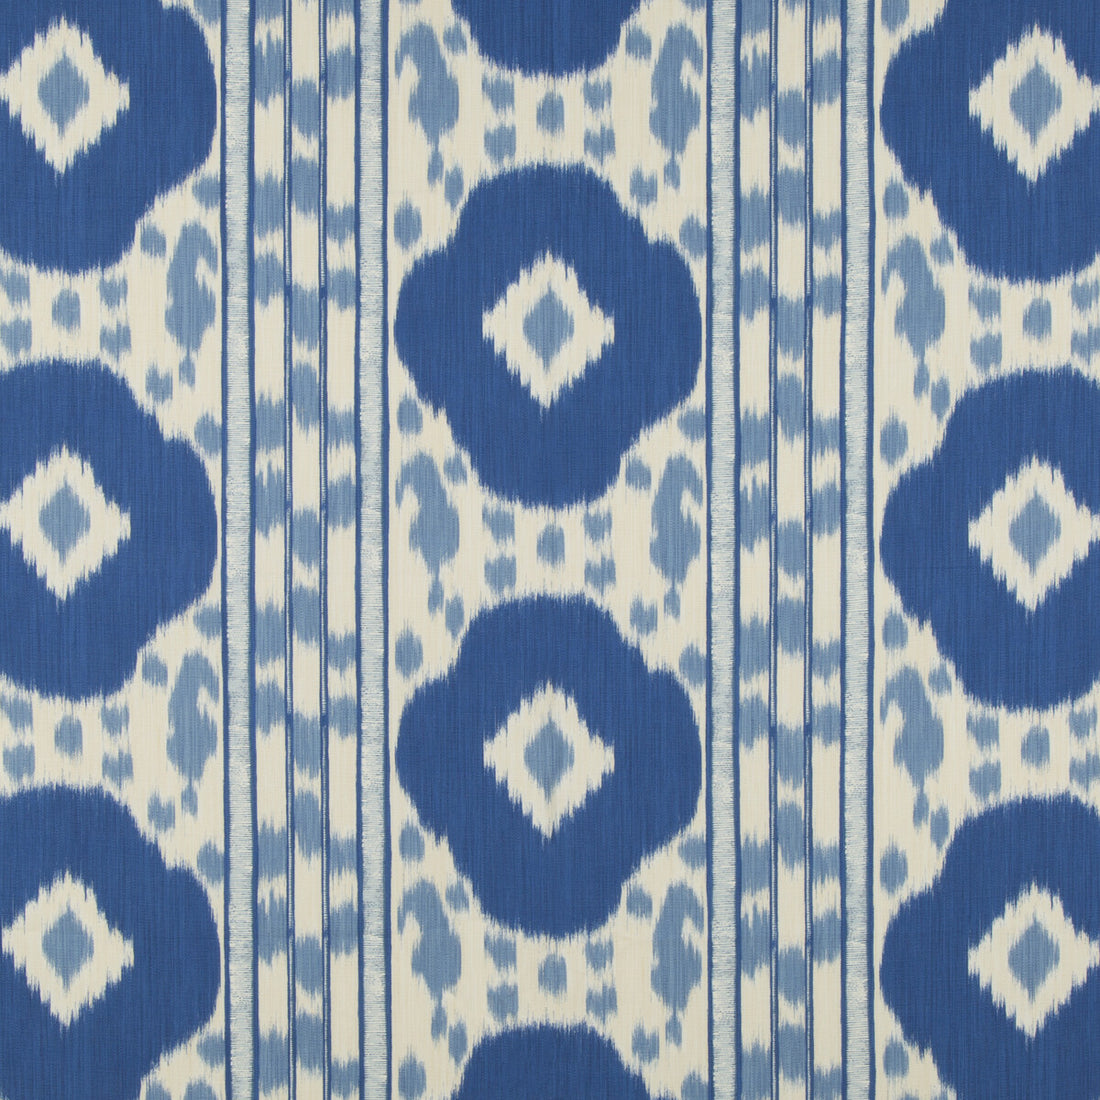 Varkala Print fabric in navy/sky color - pattern 8015178.515.0 - by Brunschwig &amp; Fils in the Cape Comorin collection